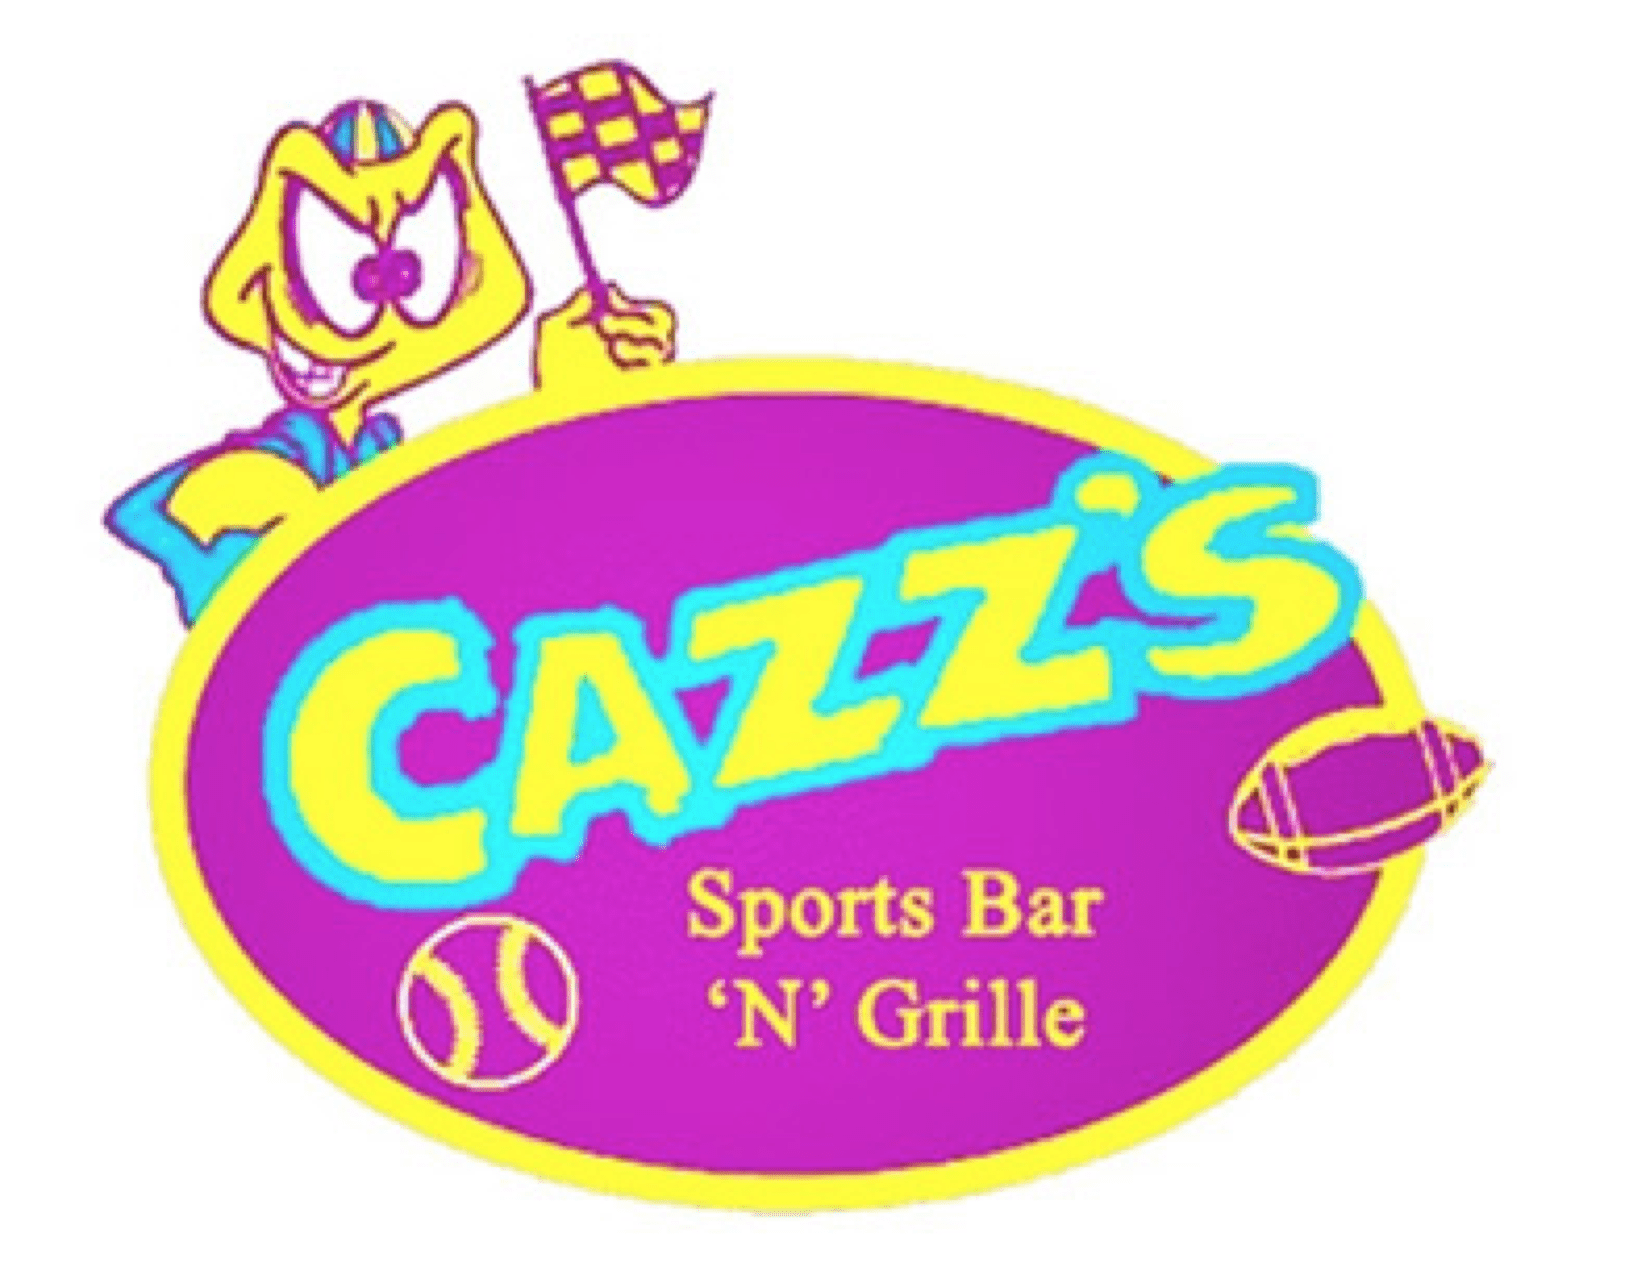 Cazz’s Sports Bar ‘N’ Grille